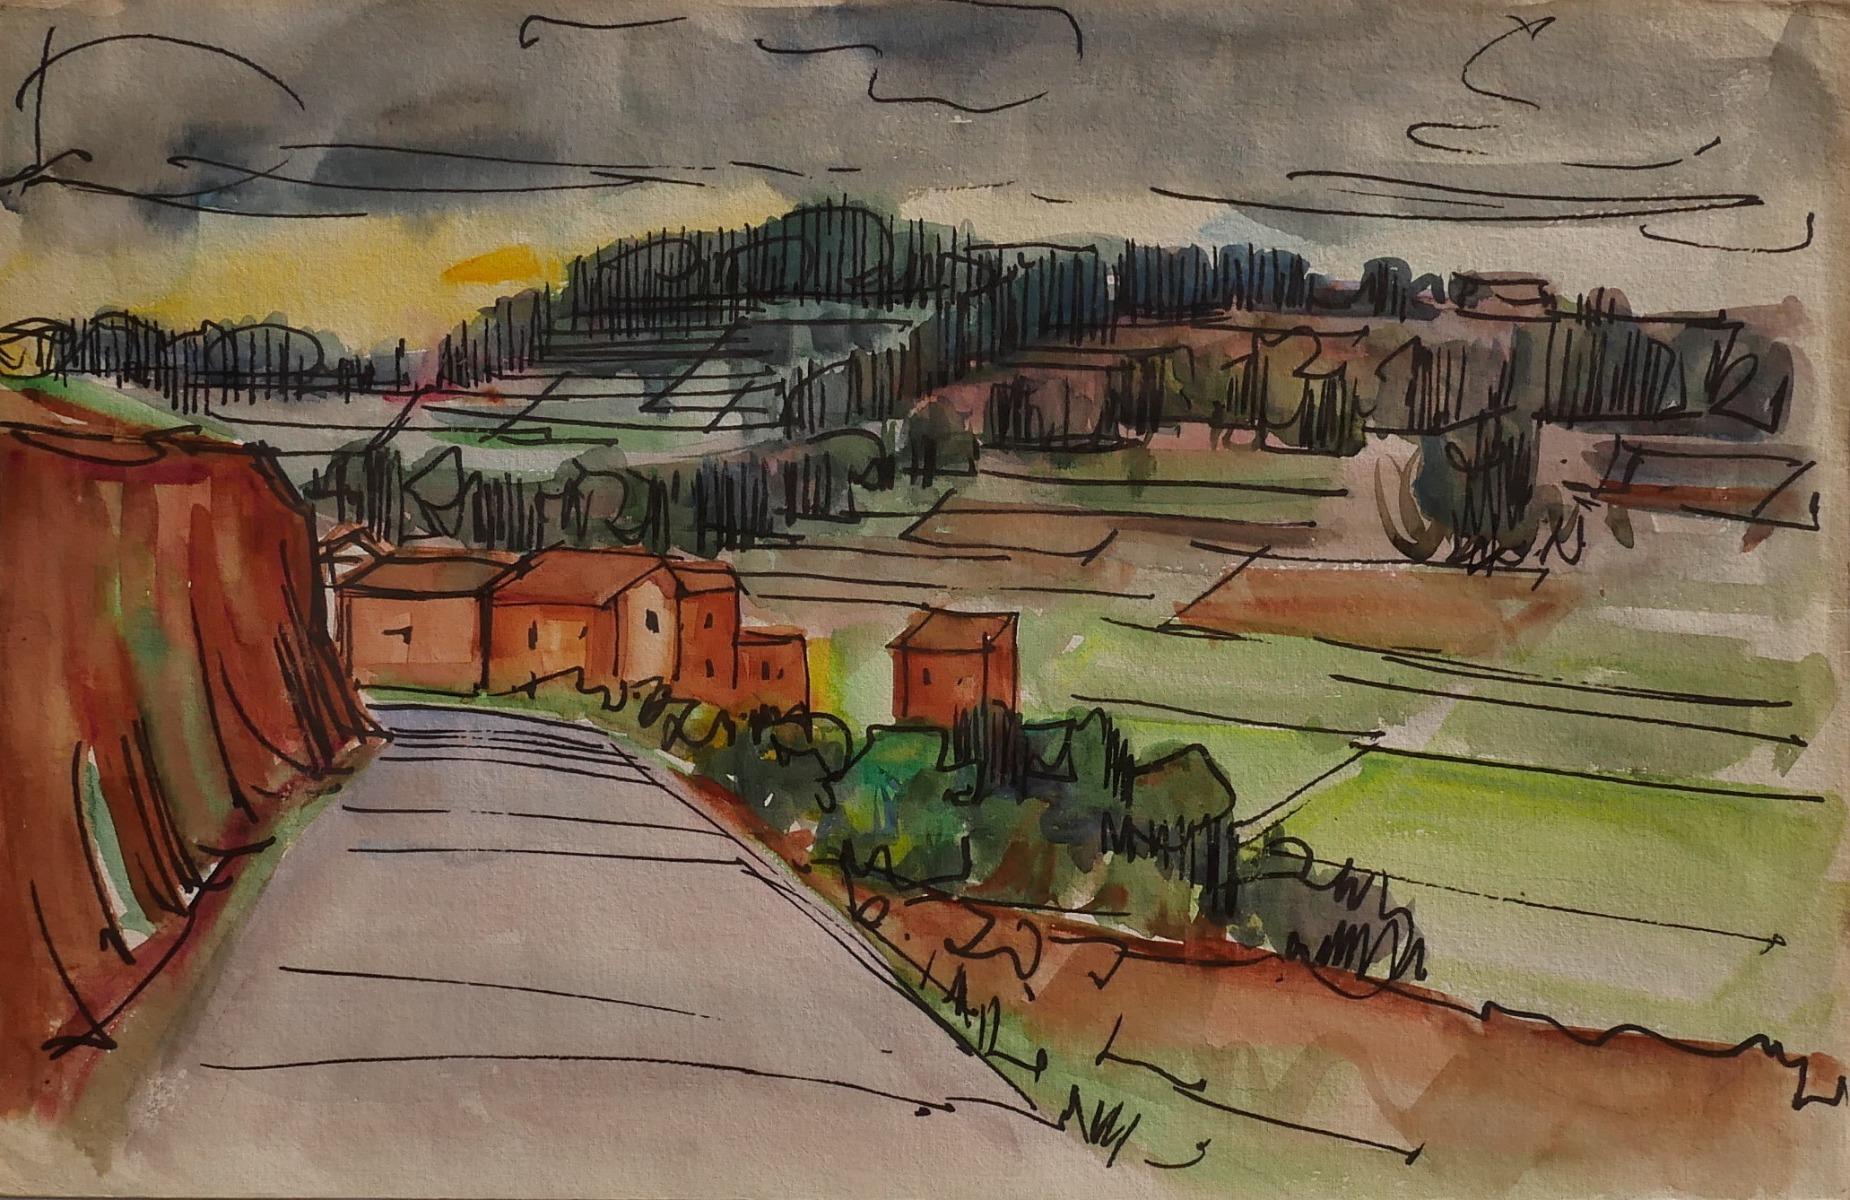 Landscape - Ink and Watercolor Drawing by E. Pavarino - 1969